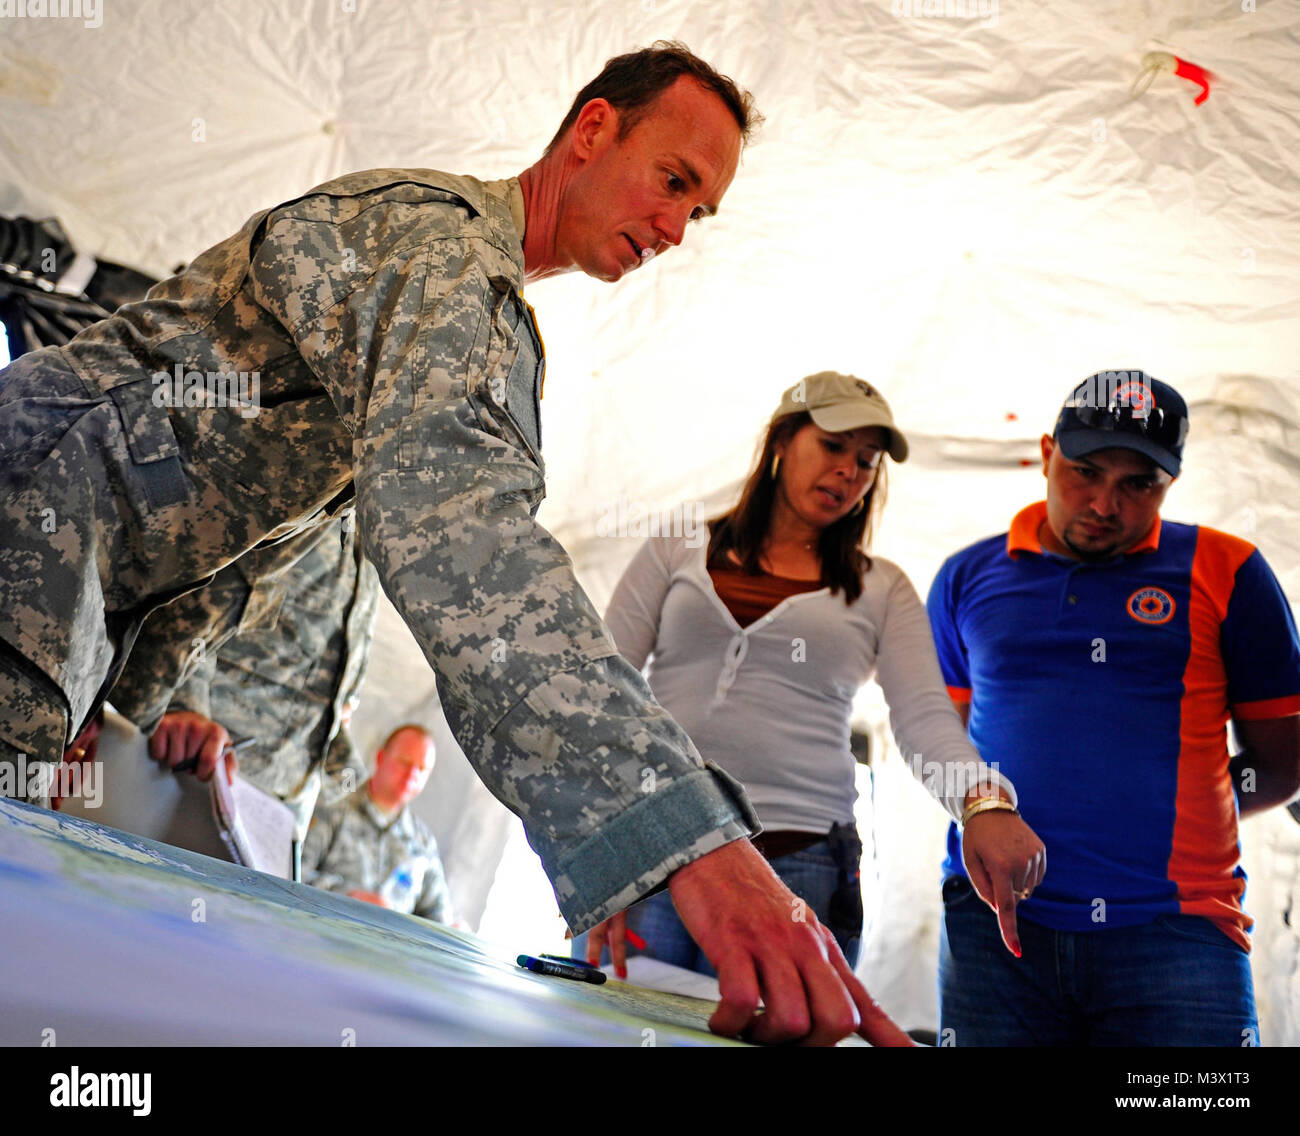 United States Army Chief Warrant Officer Edmond Bessette, CENTAM Survey and Assessment Team member and Iris Medina, C-SAT member identify the location of damage for a simulated hurricane with a Honduran Comision Permanente de Contingencias, during a simulated Hurricane disaster response exercise at Porte Castilla Honduras, May 15. The C-SAT team responds to a natural disaster and humanitarian assistance notification in the Central America Region to conduct an assessment of the area before military forces are deployed.(Air Force photo by Staff Sgt. Eric Donner) 130515-F-GW519-004 by ussouthcom Stock Photo